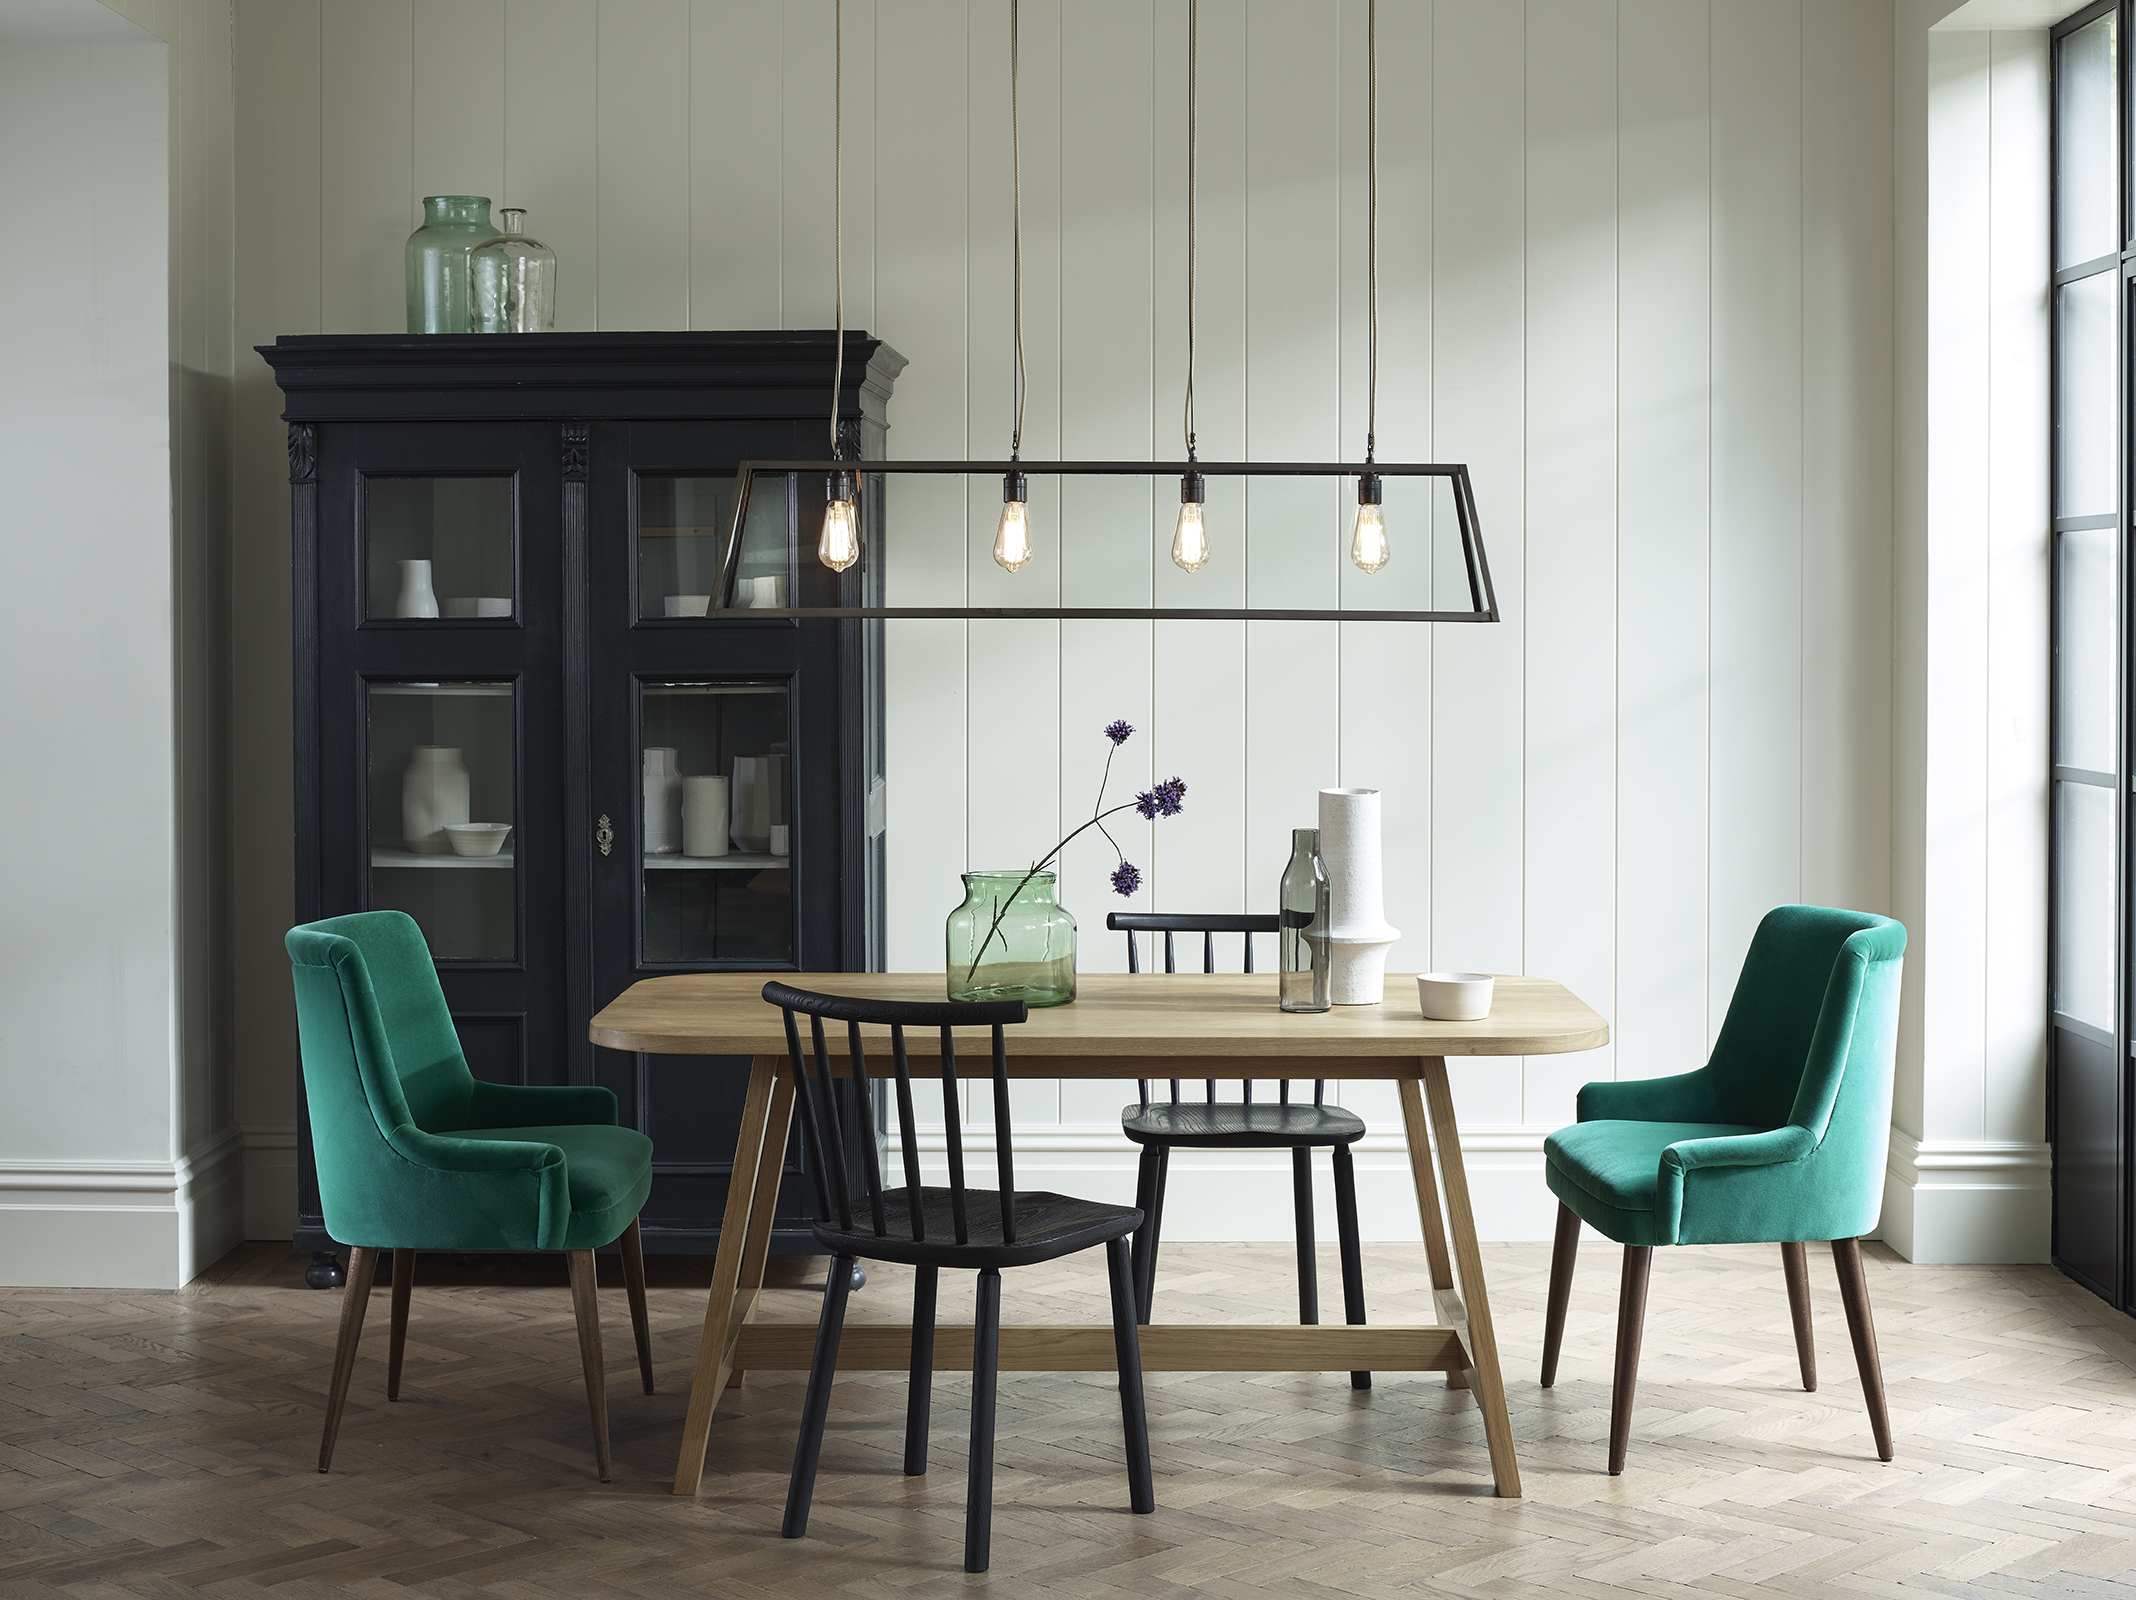 Adolescent Continent rots Lighting a dining room: how to get it right | Homes & Gardens